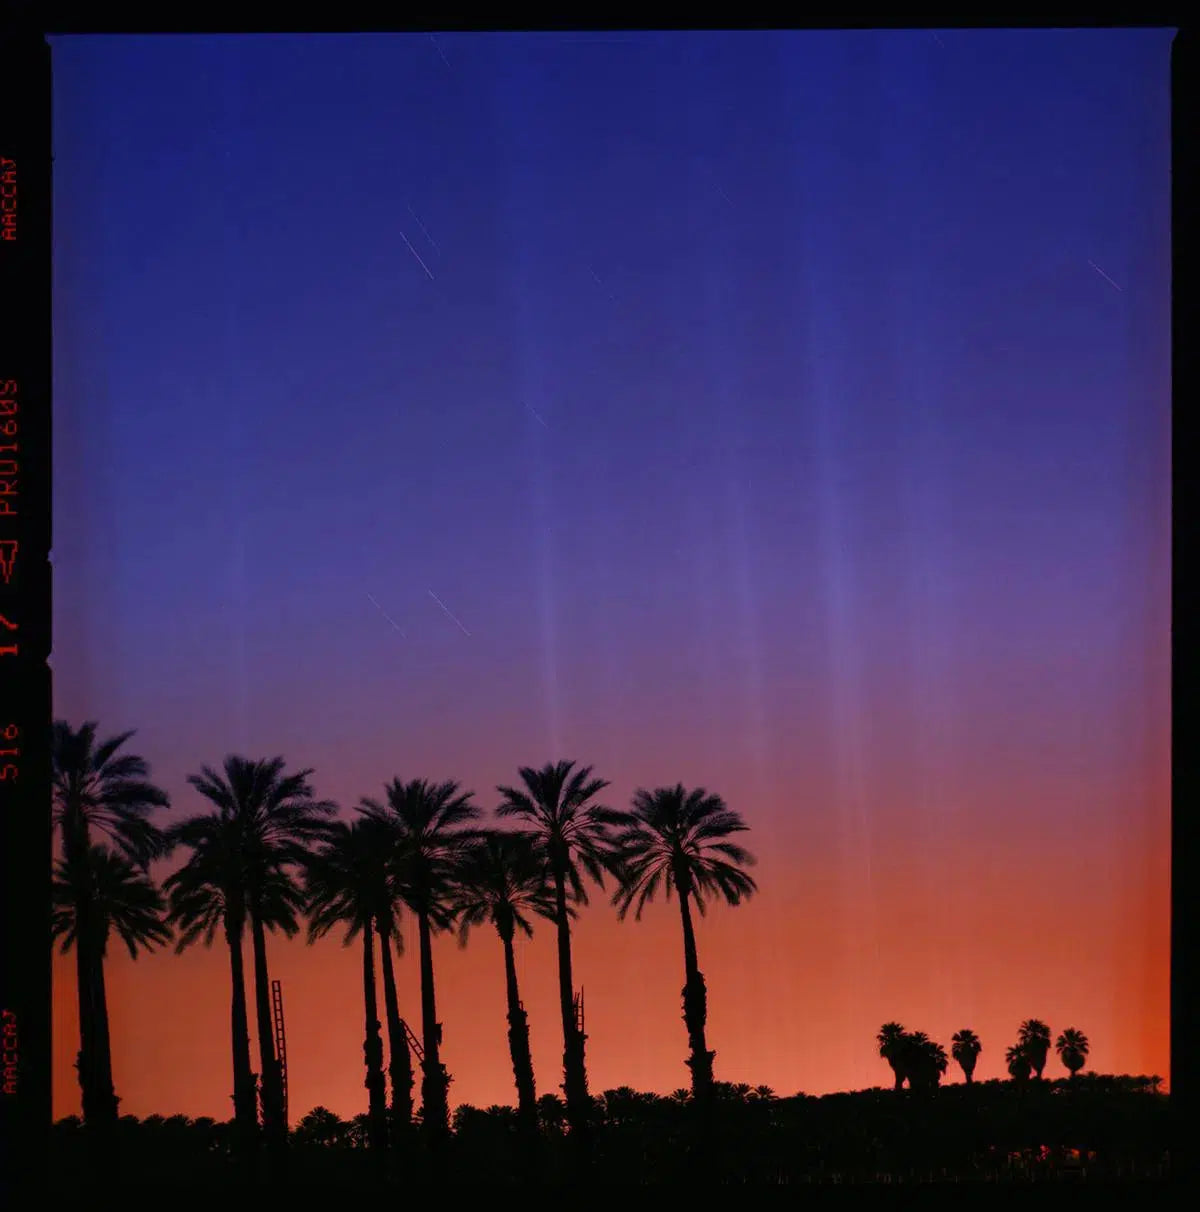 Palms in the Desert, by Garret Suhrie-PurePhoto